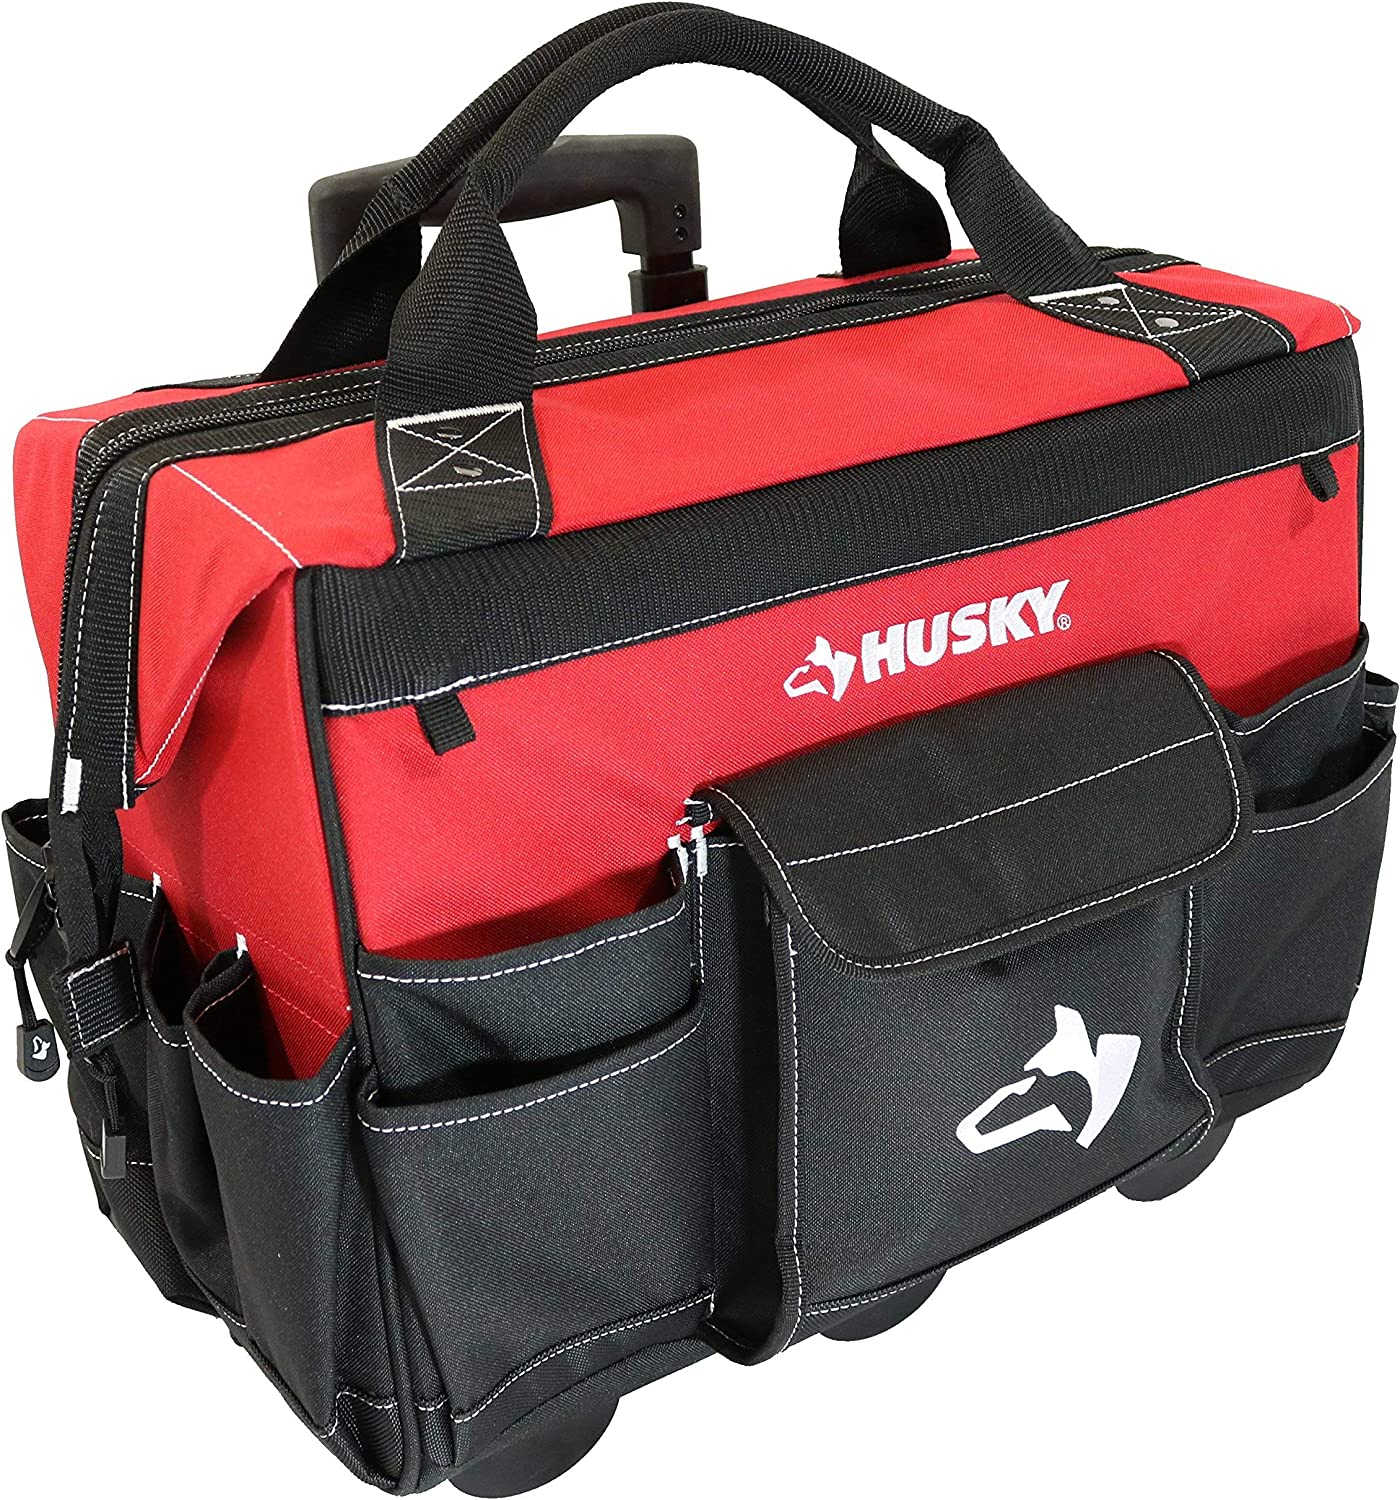 Husky 22-Inch Rolling Tote Tool Carrier Review